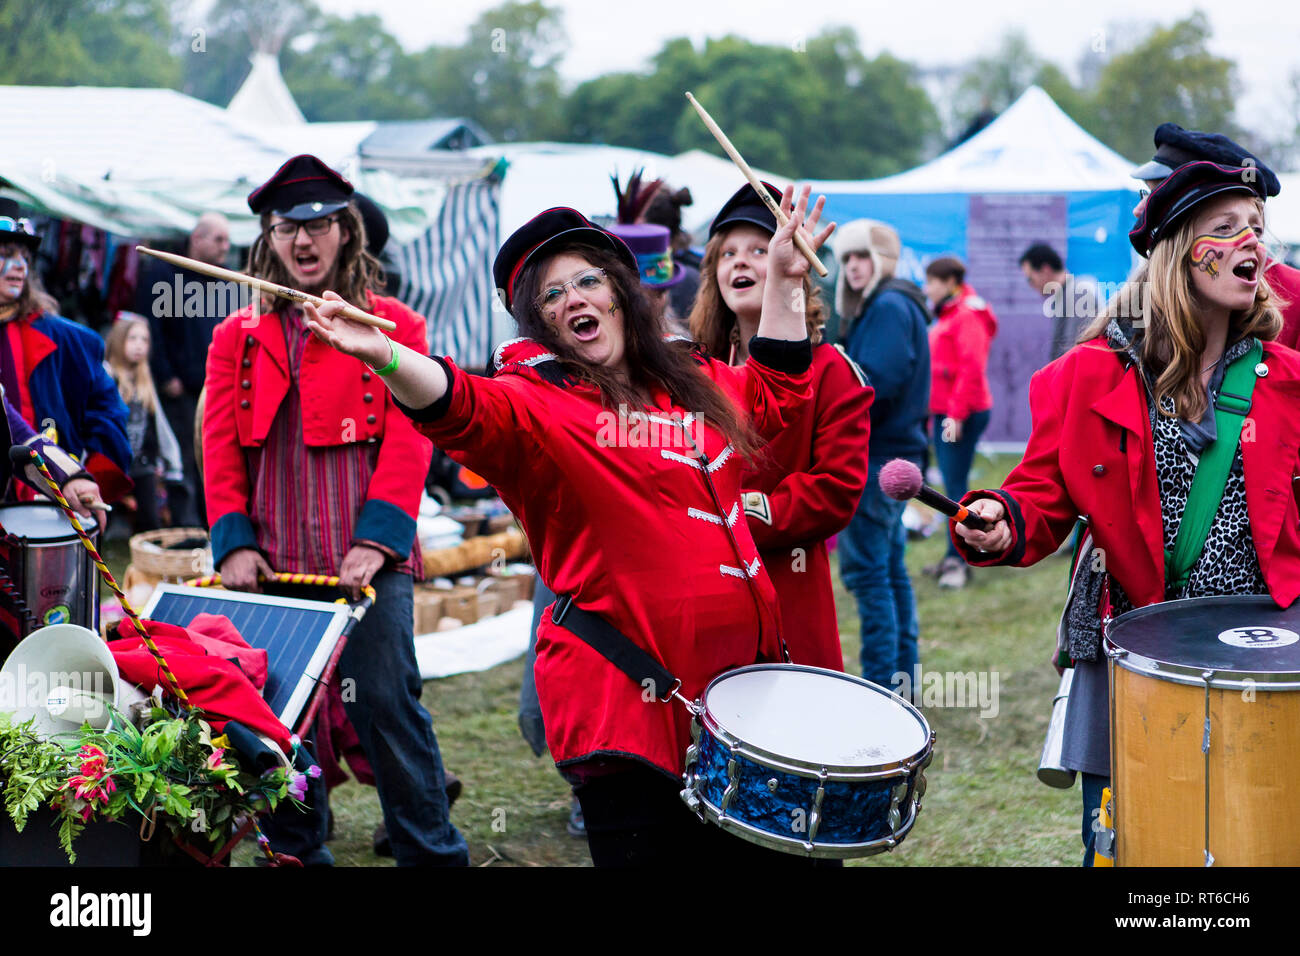 Military style drumming parade with red costumes at Beltane Fire Festival, Sussex, UK Stock Photo